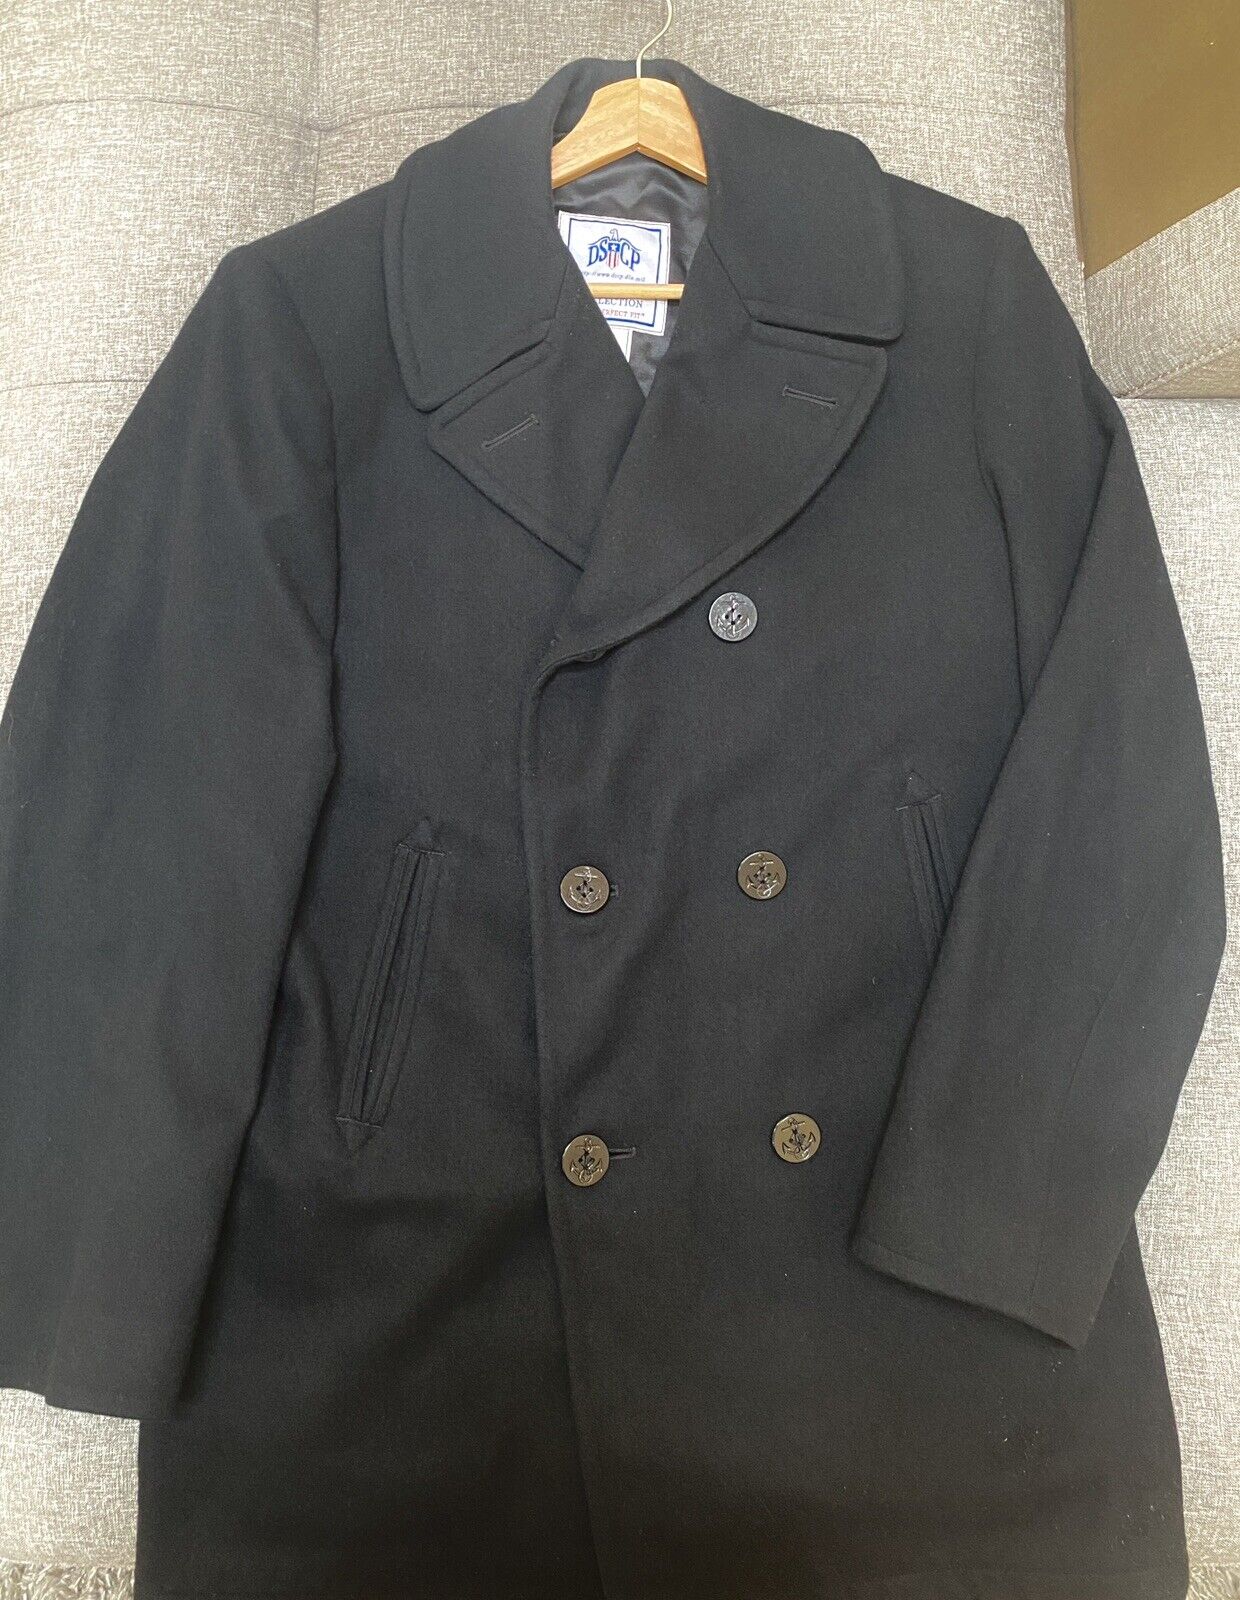 DSCP Quarterdeck Collection US Navy Pea Coat SIZE 42XL Wool Military Issue Black